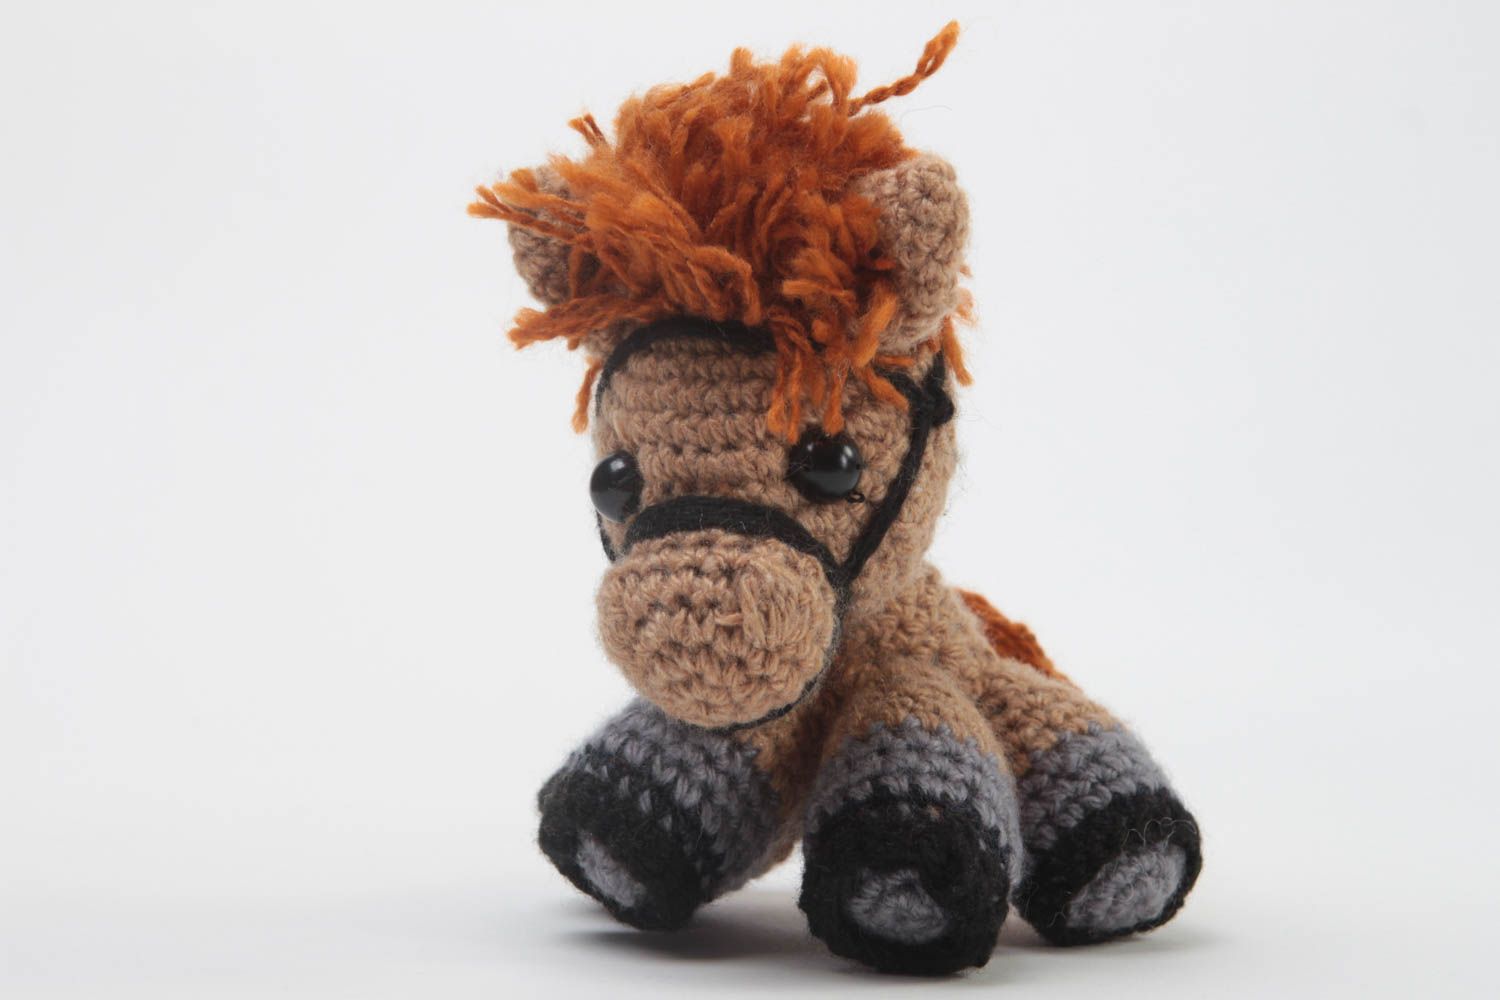 Miniature handmade soft toy stuffed toy for kids crochet horse toy gift ideas photo 2